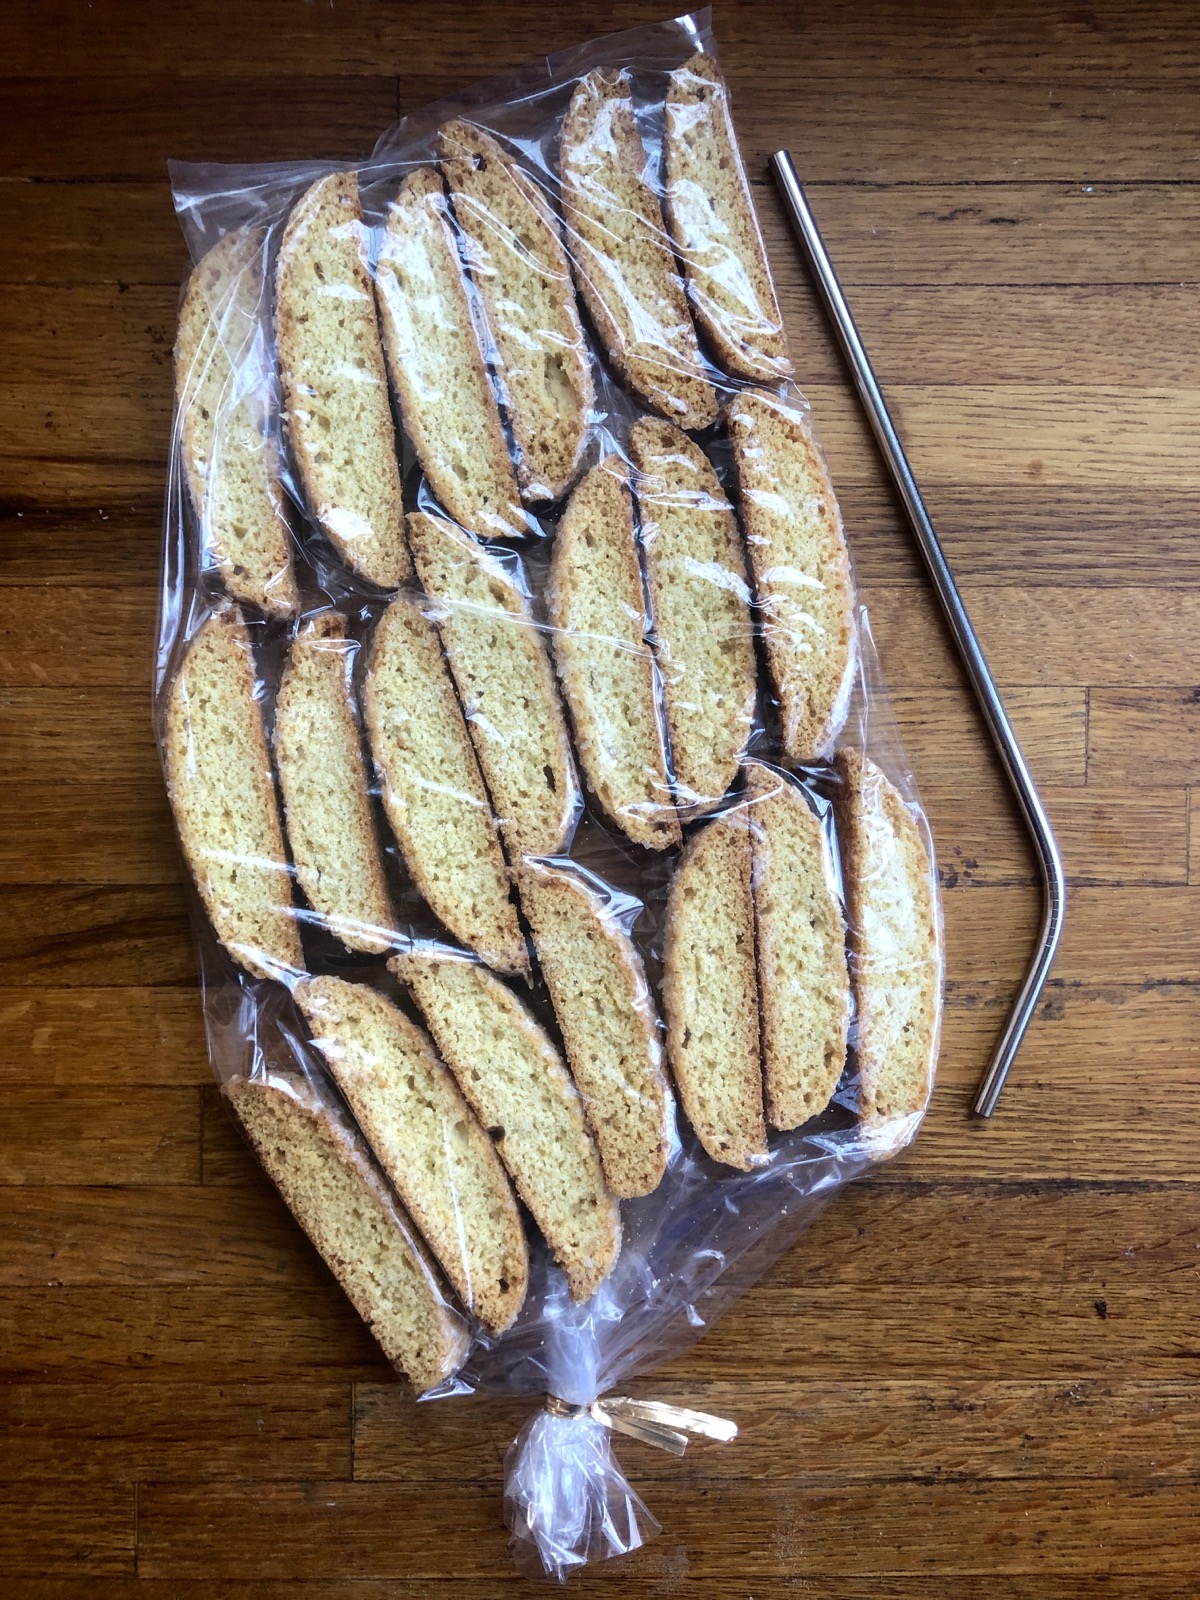 Vanilla biscotti in a bag with the air pushed out, for best freshness.